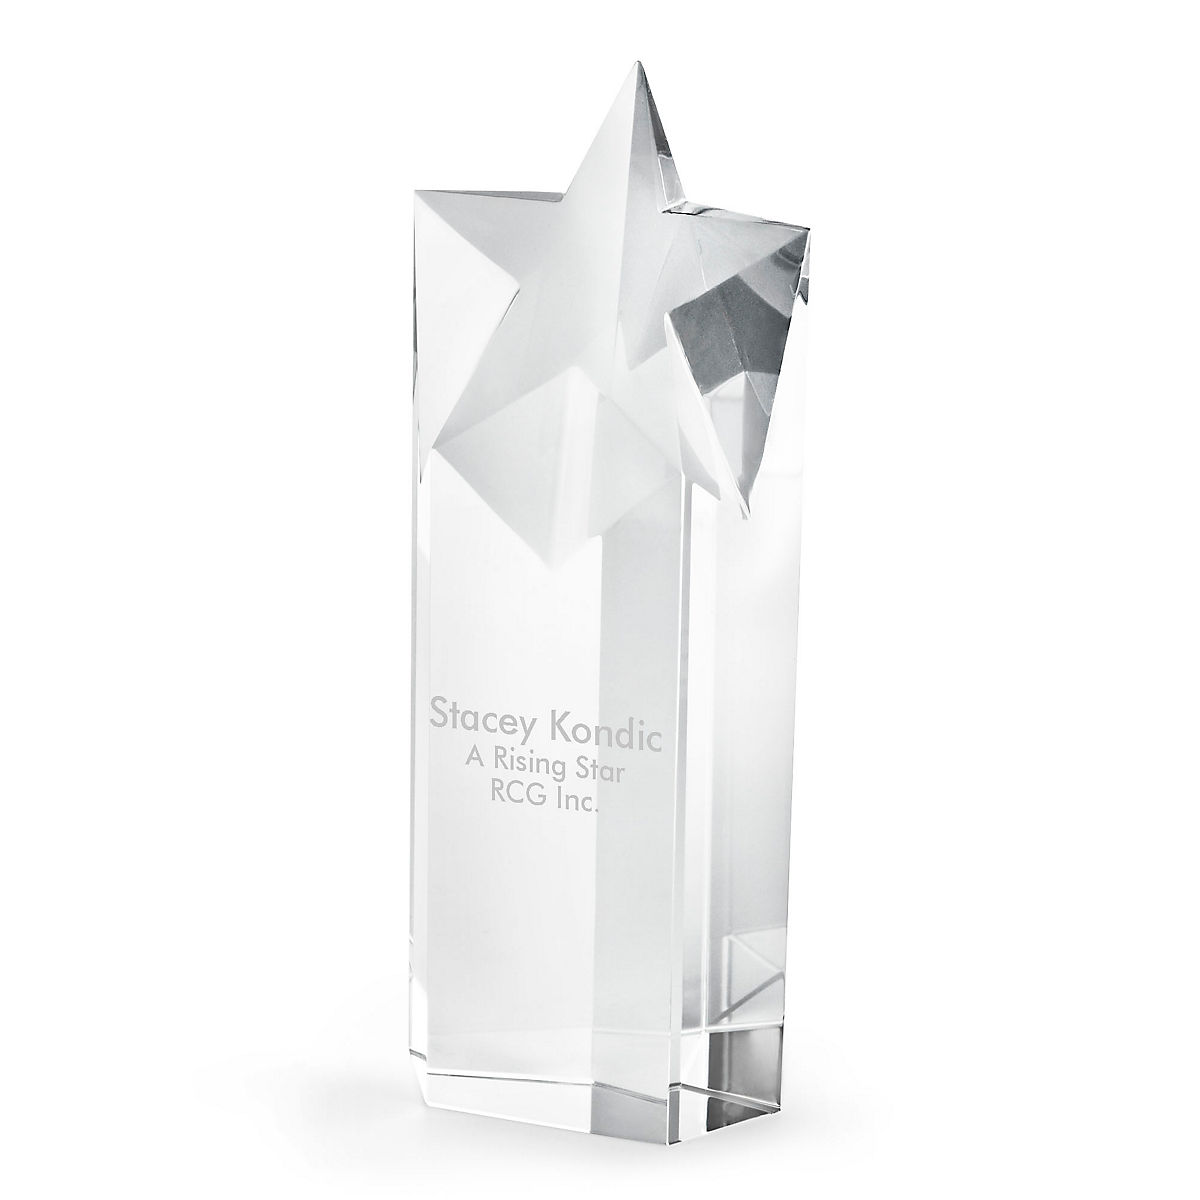 Things Remembered Personalized Silver Star on Crystal Award with Engraving Included 